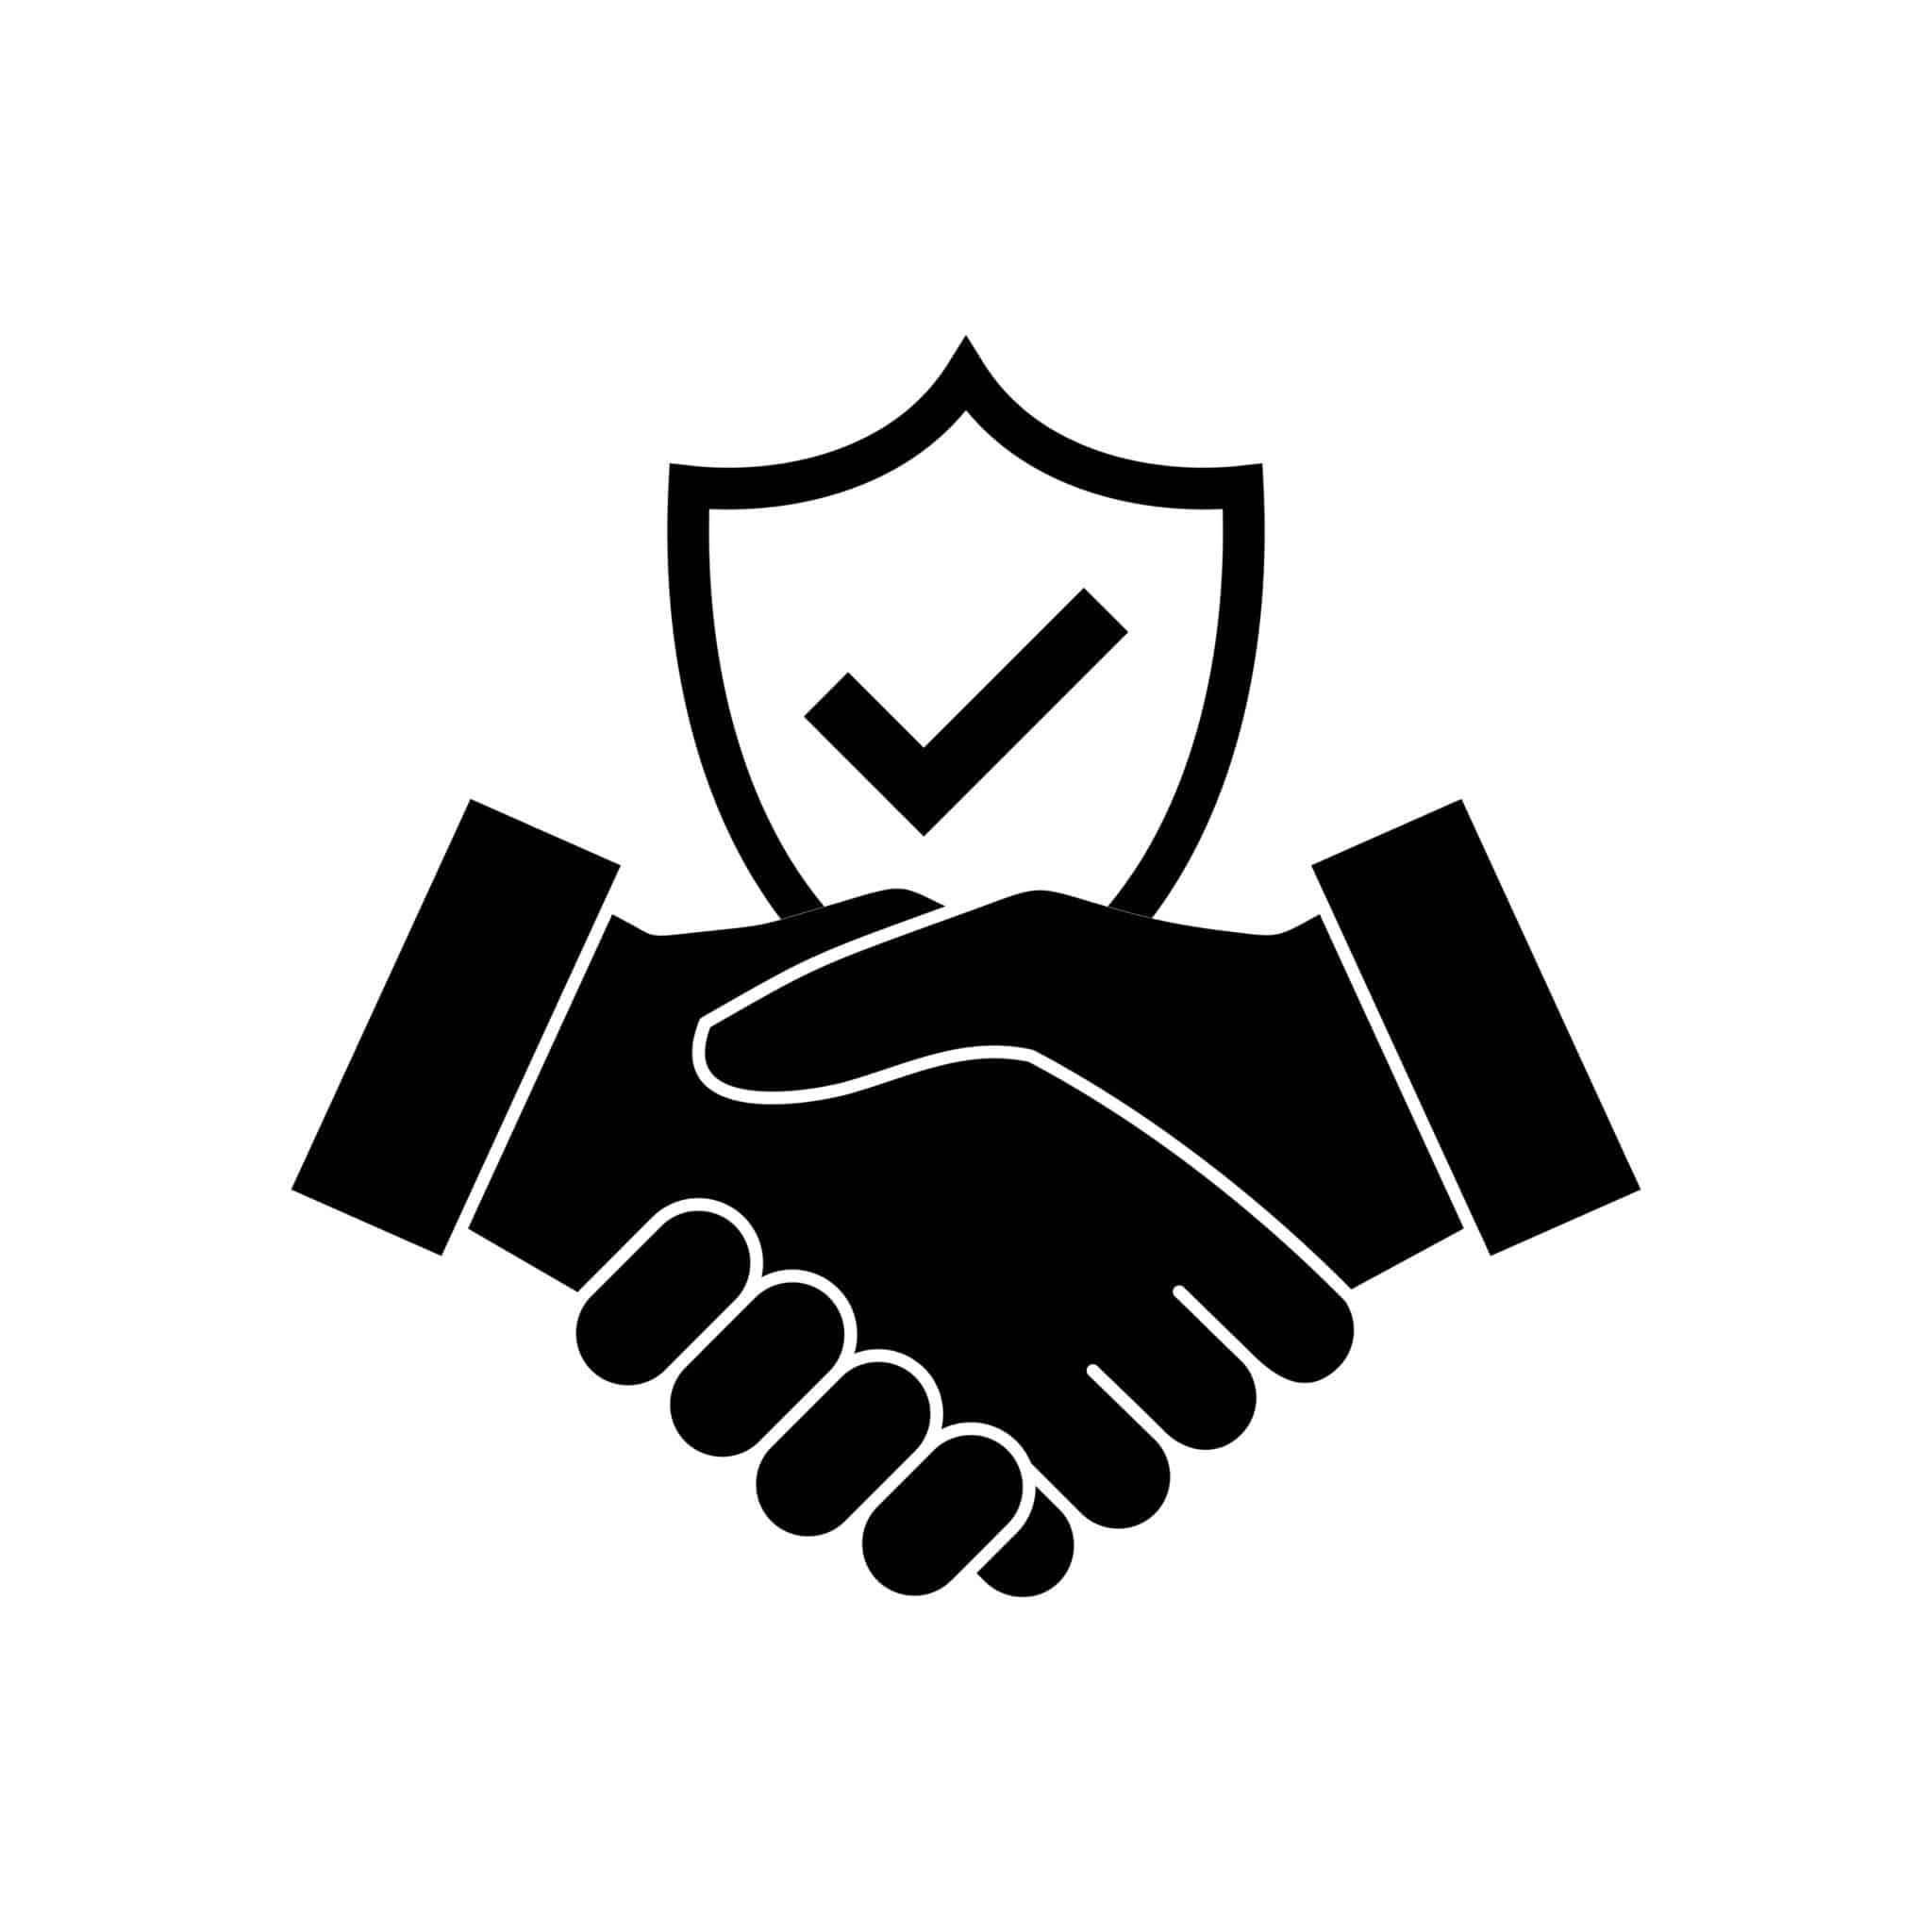 Handshake trust icon symbolizes partnership & protection for Athreon's secure transcription services